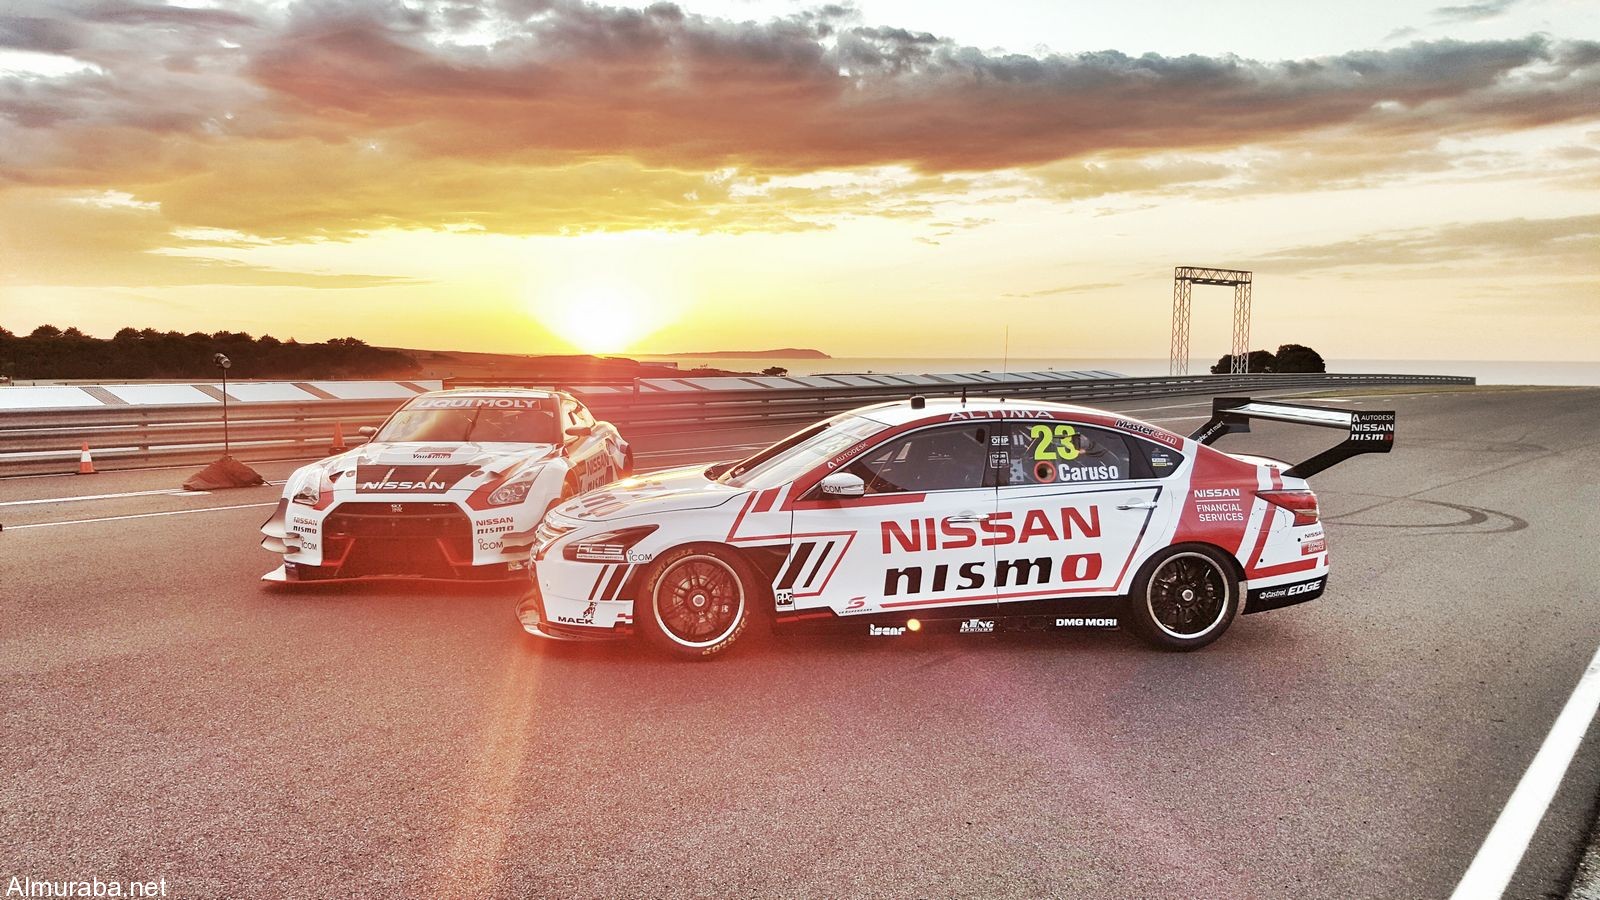 PHILLIP ISLAND, Australia (Jan. 28, 2016) – Nissan has unveiled its 2016 Australian motorsport activities at the Phillip Island Grand Prix Circuit in Victoria today. The 2016 livery for Michael Caruso’s #23 NISMO Nissan Altima V8 Supercar was revealed, carrying a variation of the global GT3 colors that the Altima carried in 2015. Also on track was the #1 Nissan GT-R NISMO GT3 that will aim to take back-to-back Bathurst 12 Hour victories for Nissan next week, with an Australian flag added to the now-familiar livery.